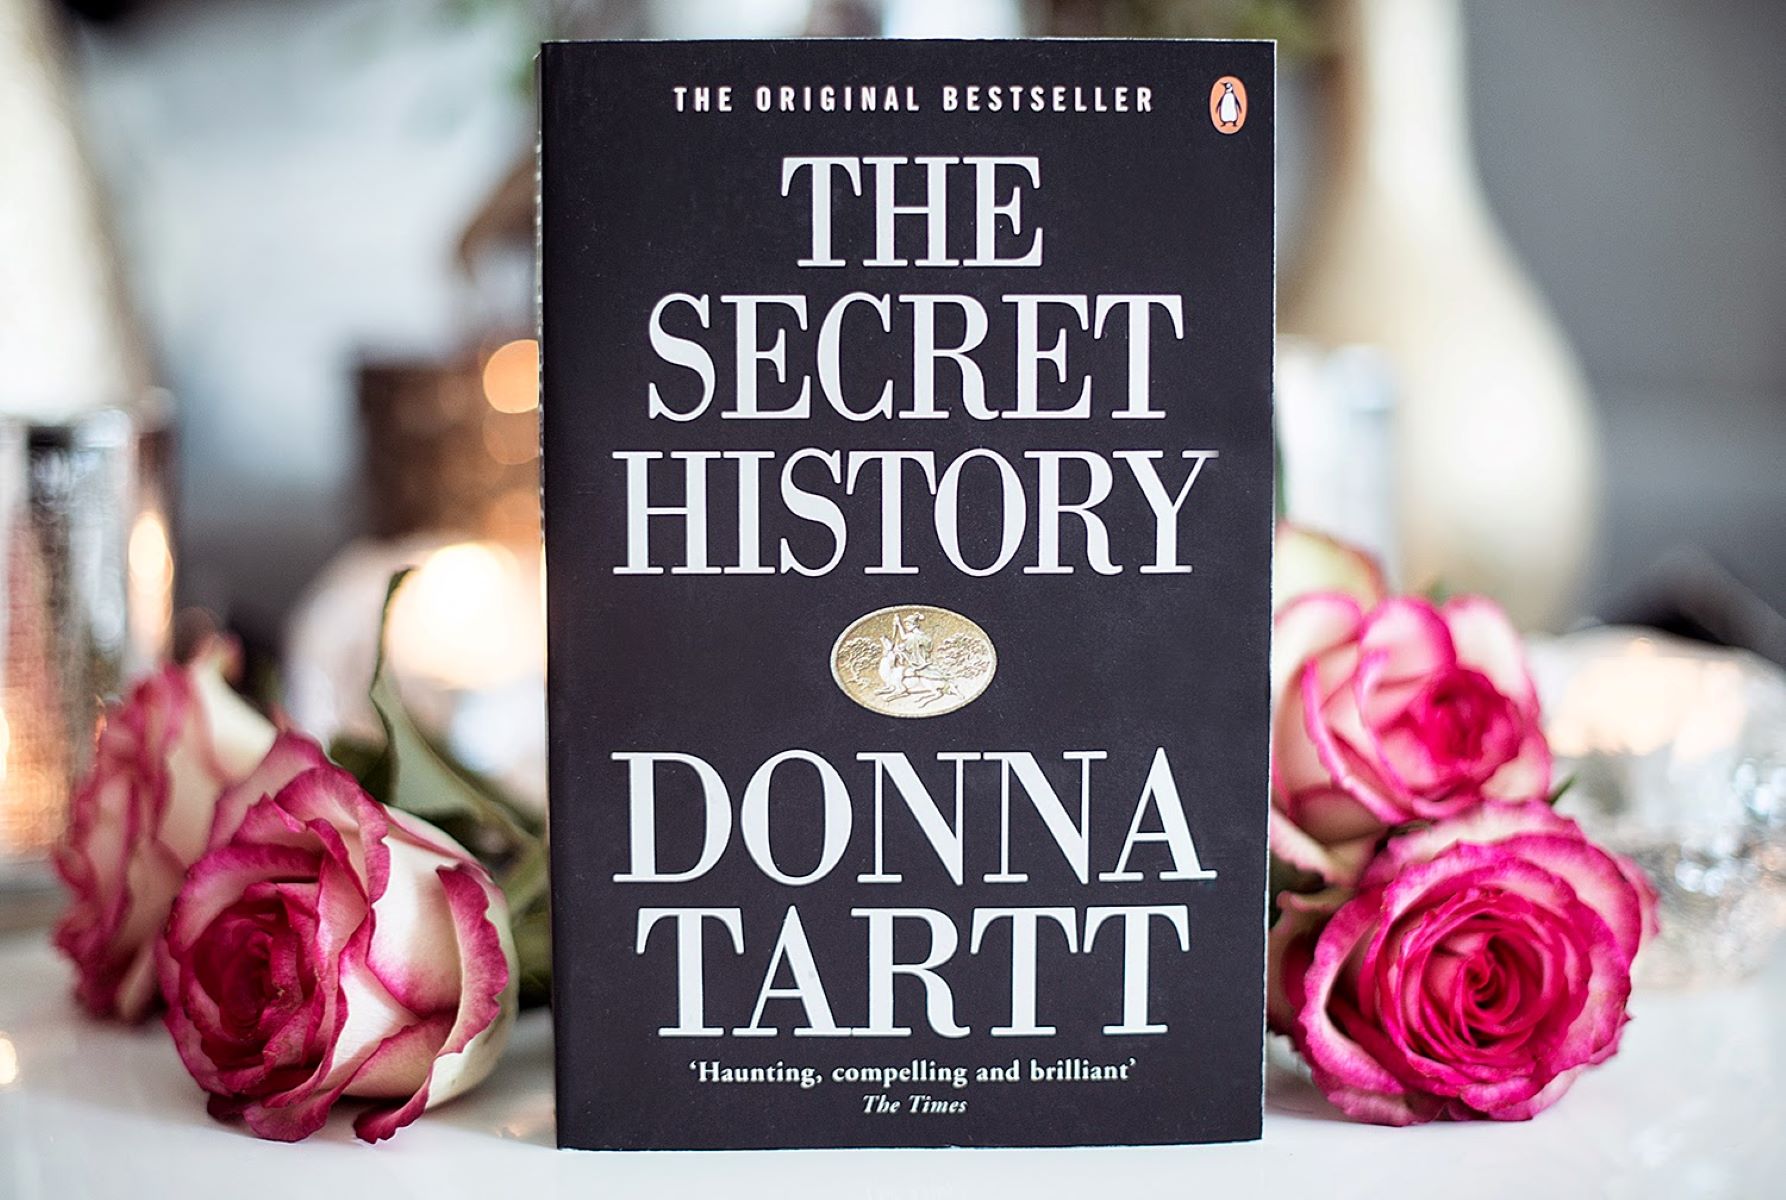 13-extraordinary-facts-about-the-secret-history-donna-tartt